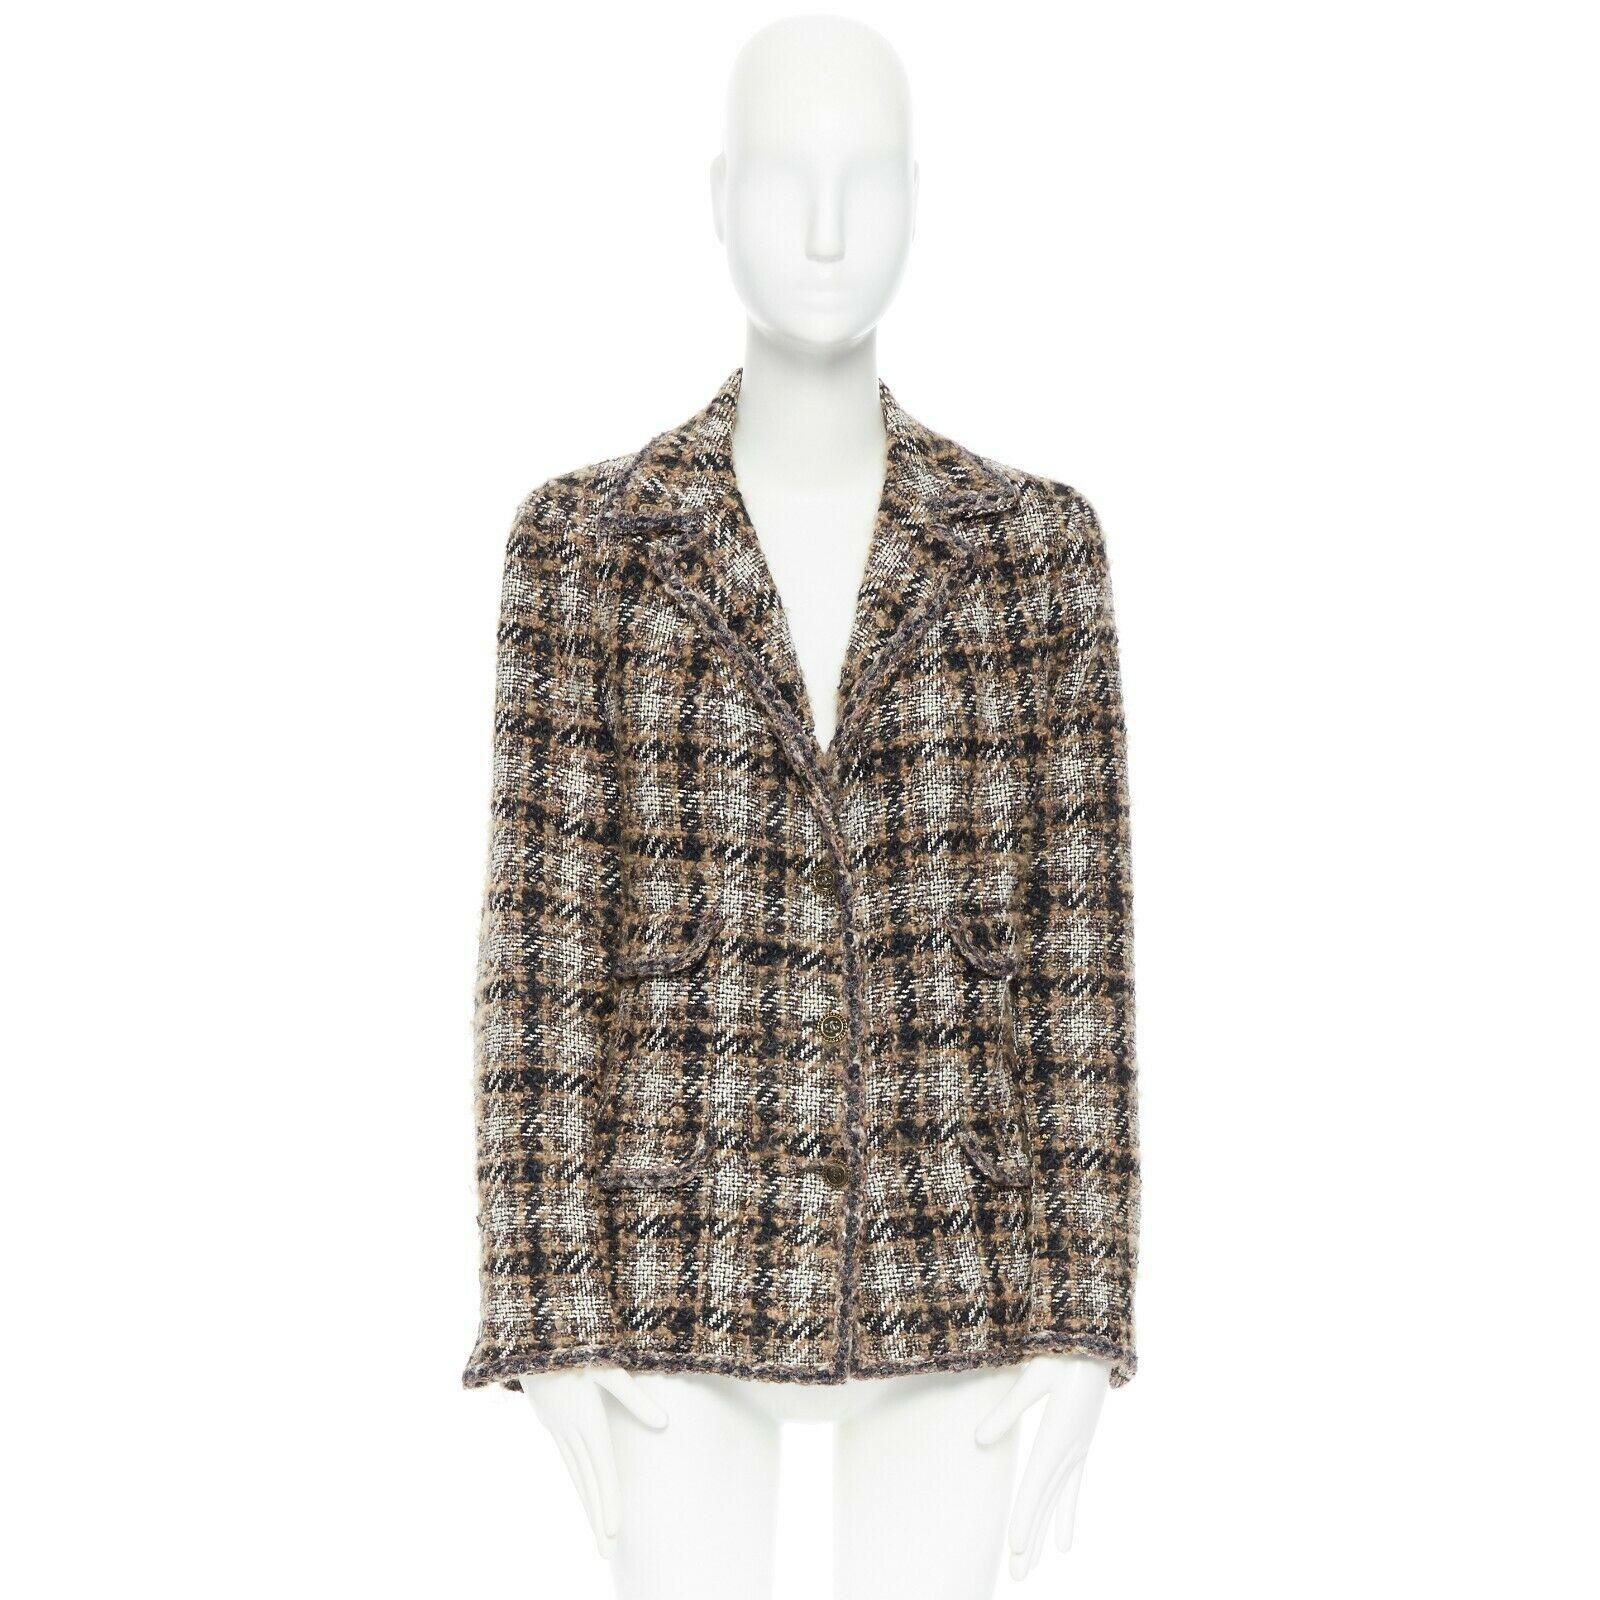 Beige CHANEL 05A brown khaki check boucle tweed 4 pocket prince of wales jacket FR42